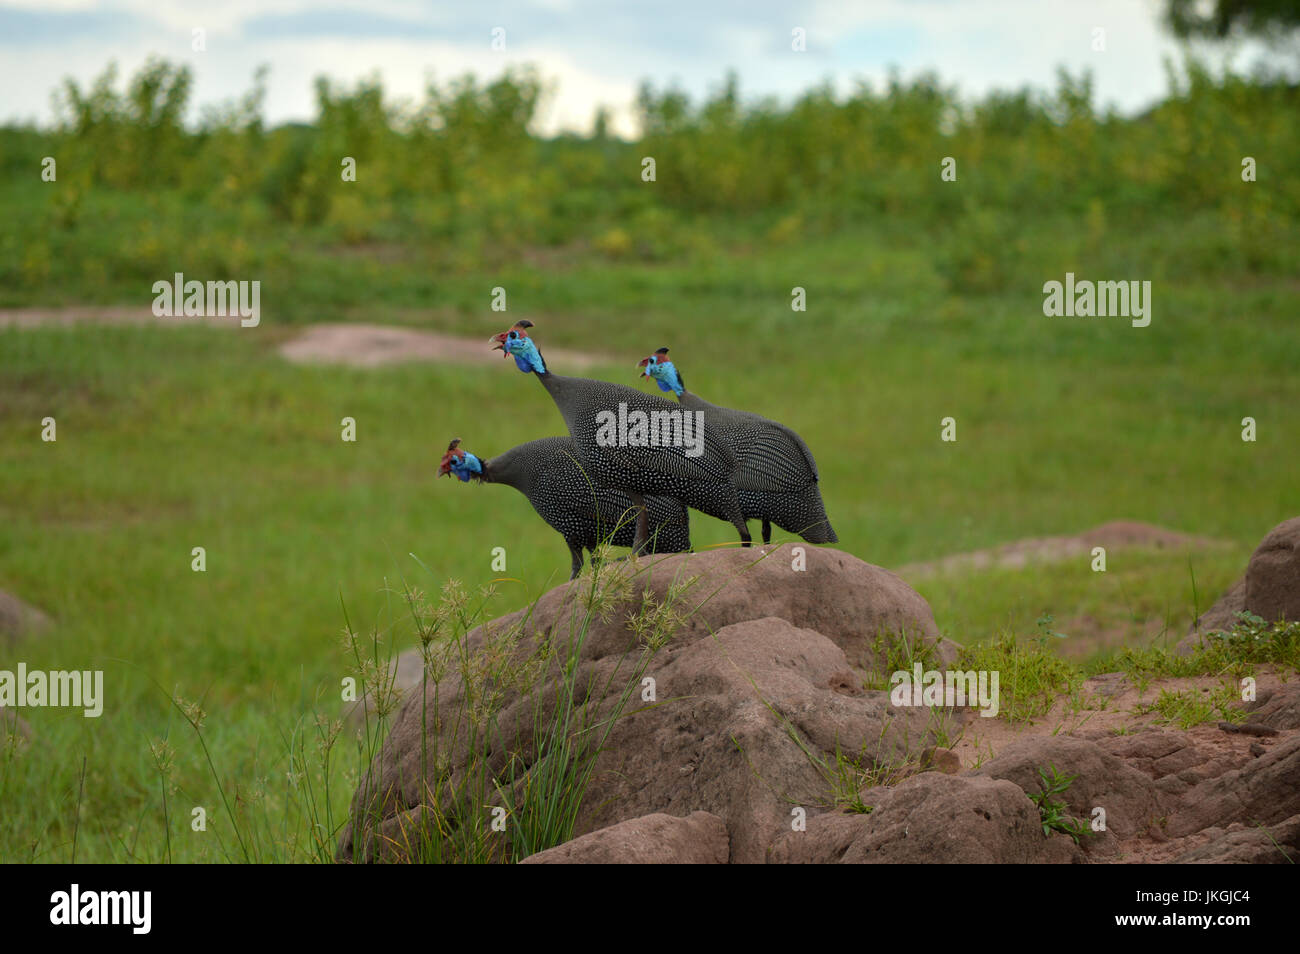 A group of 3 Guinea Fowl warning their fellow Guineas of nearby danger Stock Photo